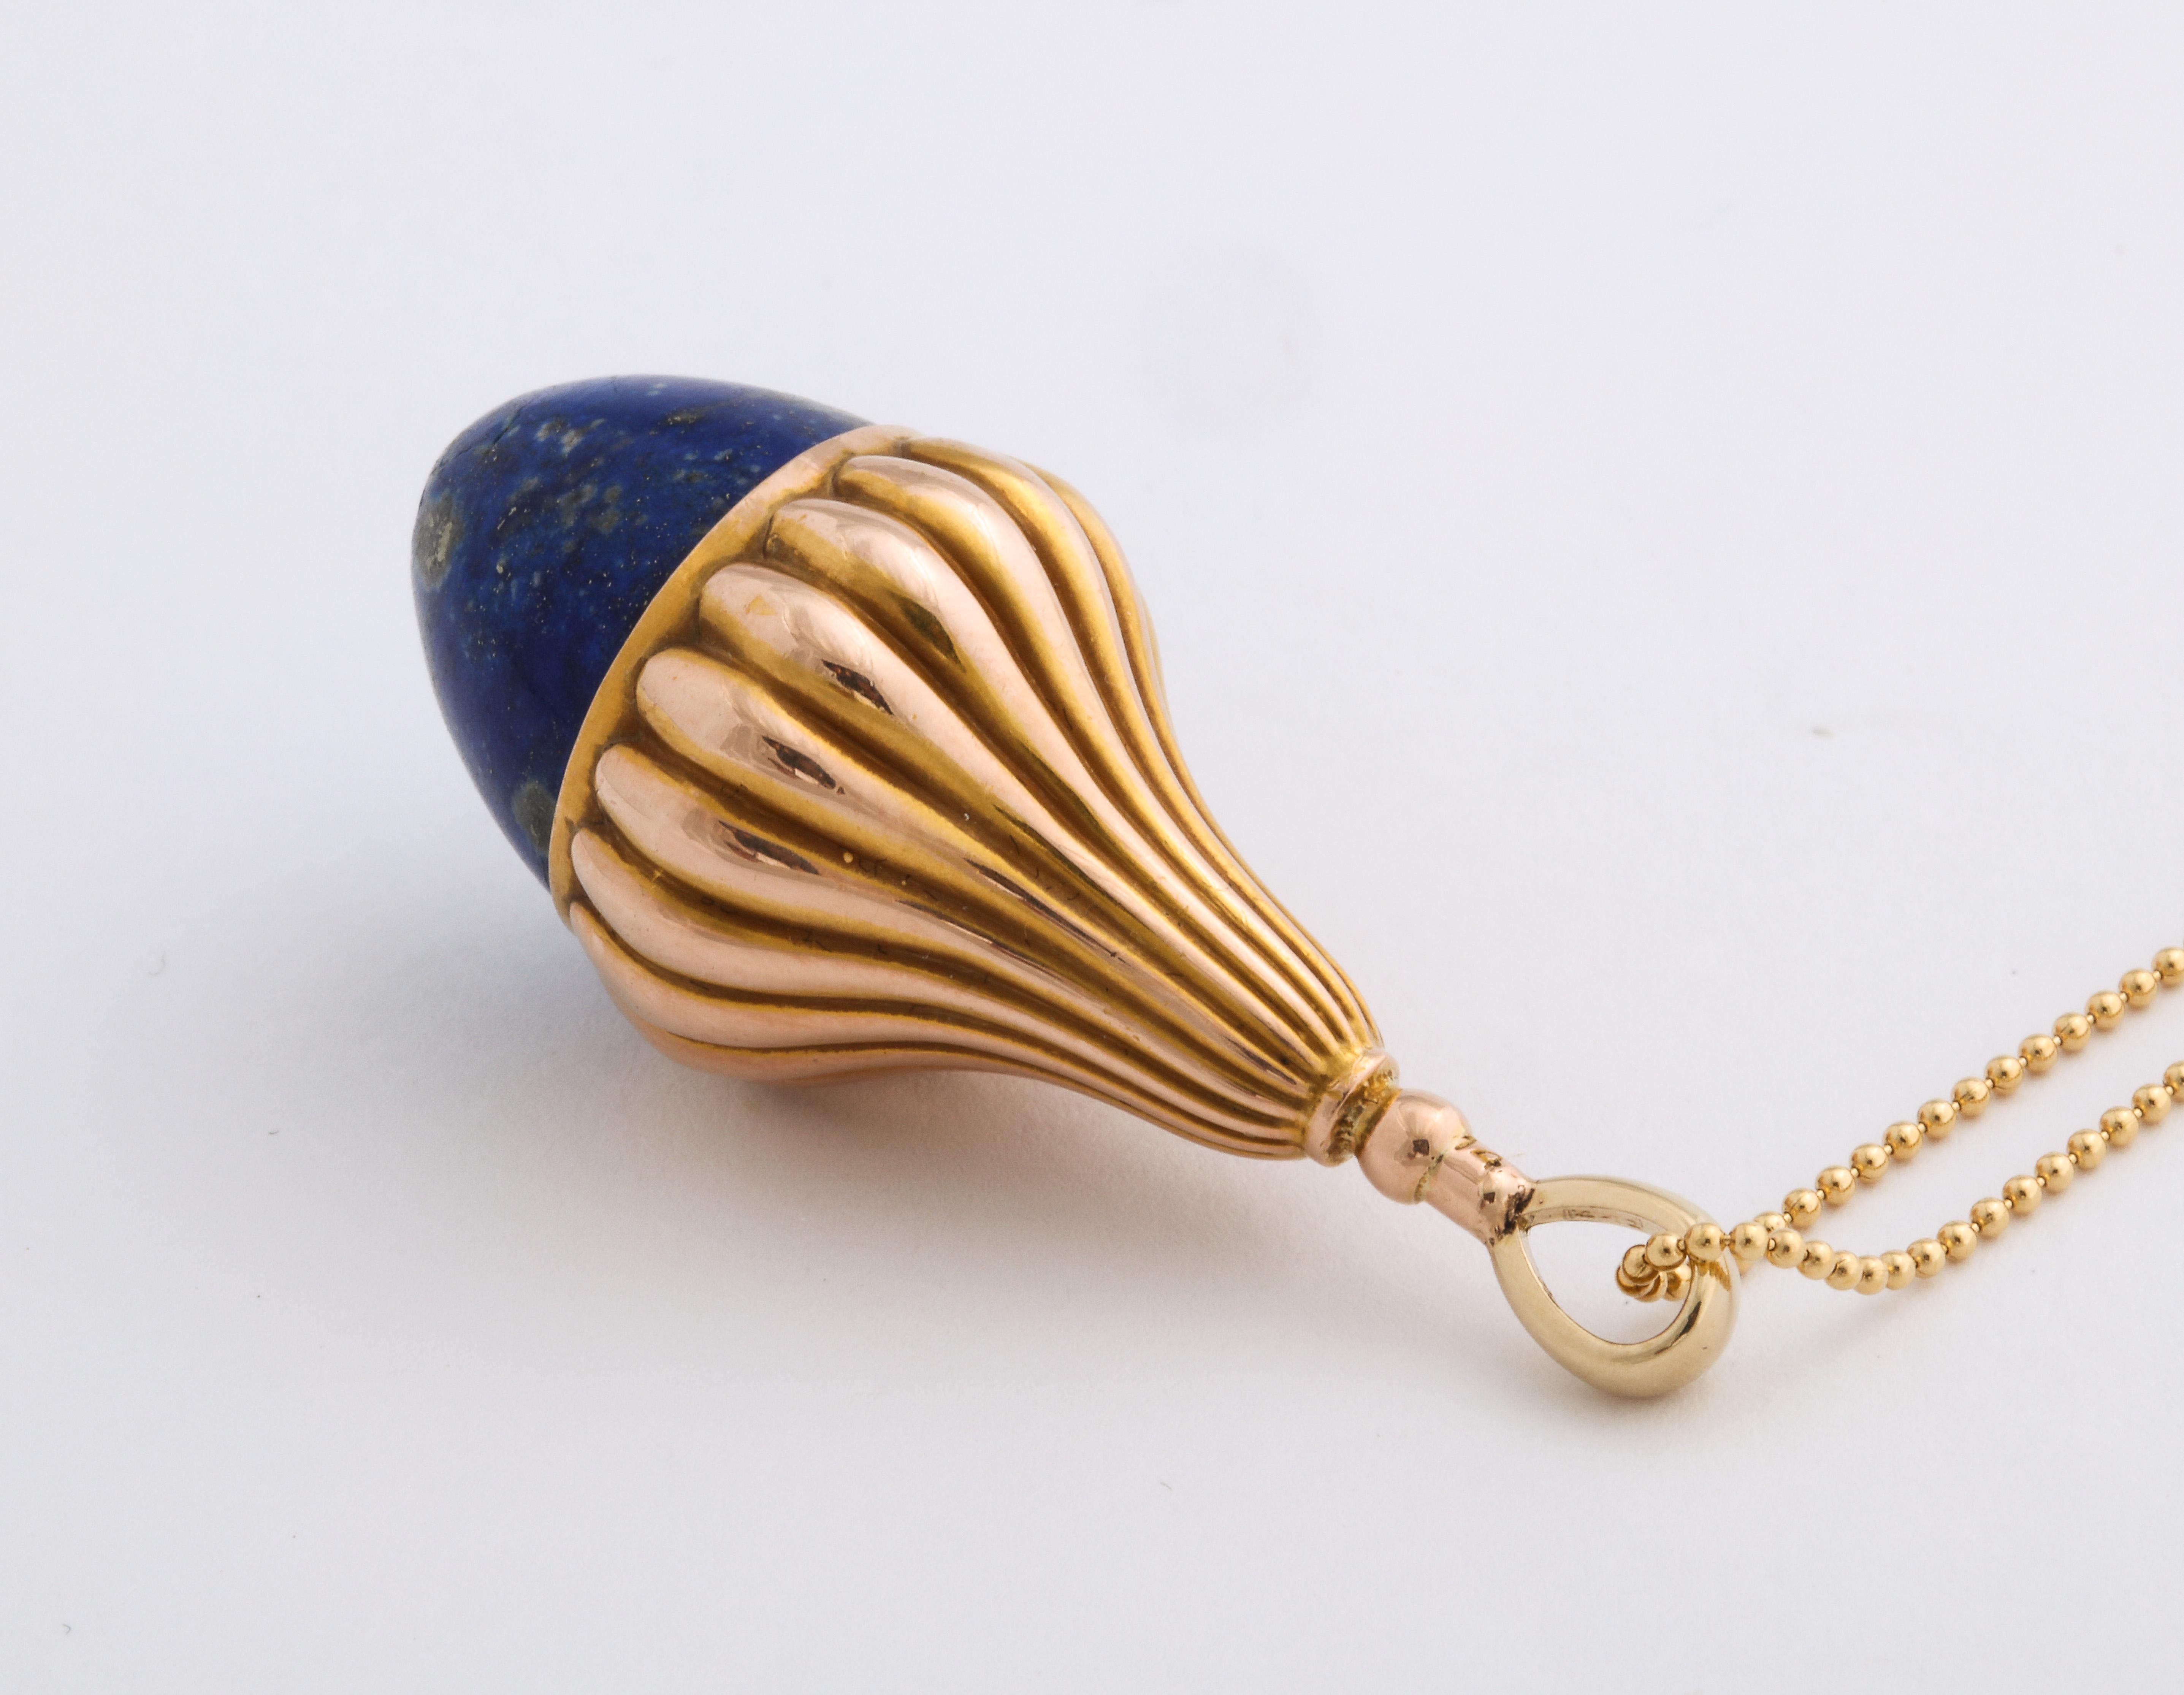 Lapis Lazuli admirers rejoice at this Victorian speckled 7 to 8 ct sugarloaf lapis fob set in a 14 Kt tulip setting. The setting is deeply engraved with ridges. The fob can be worn on a chain at the neck together with other items or it can be added